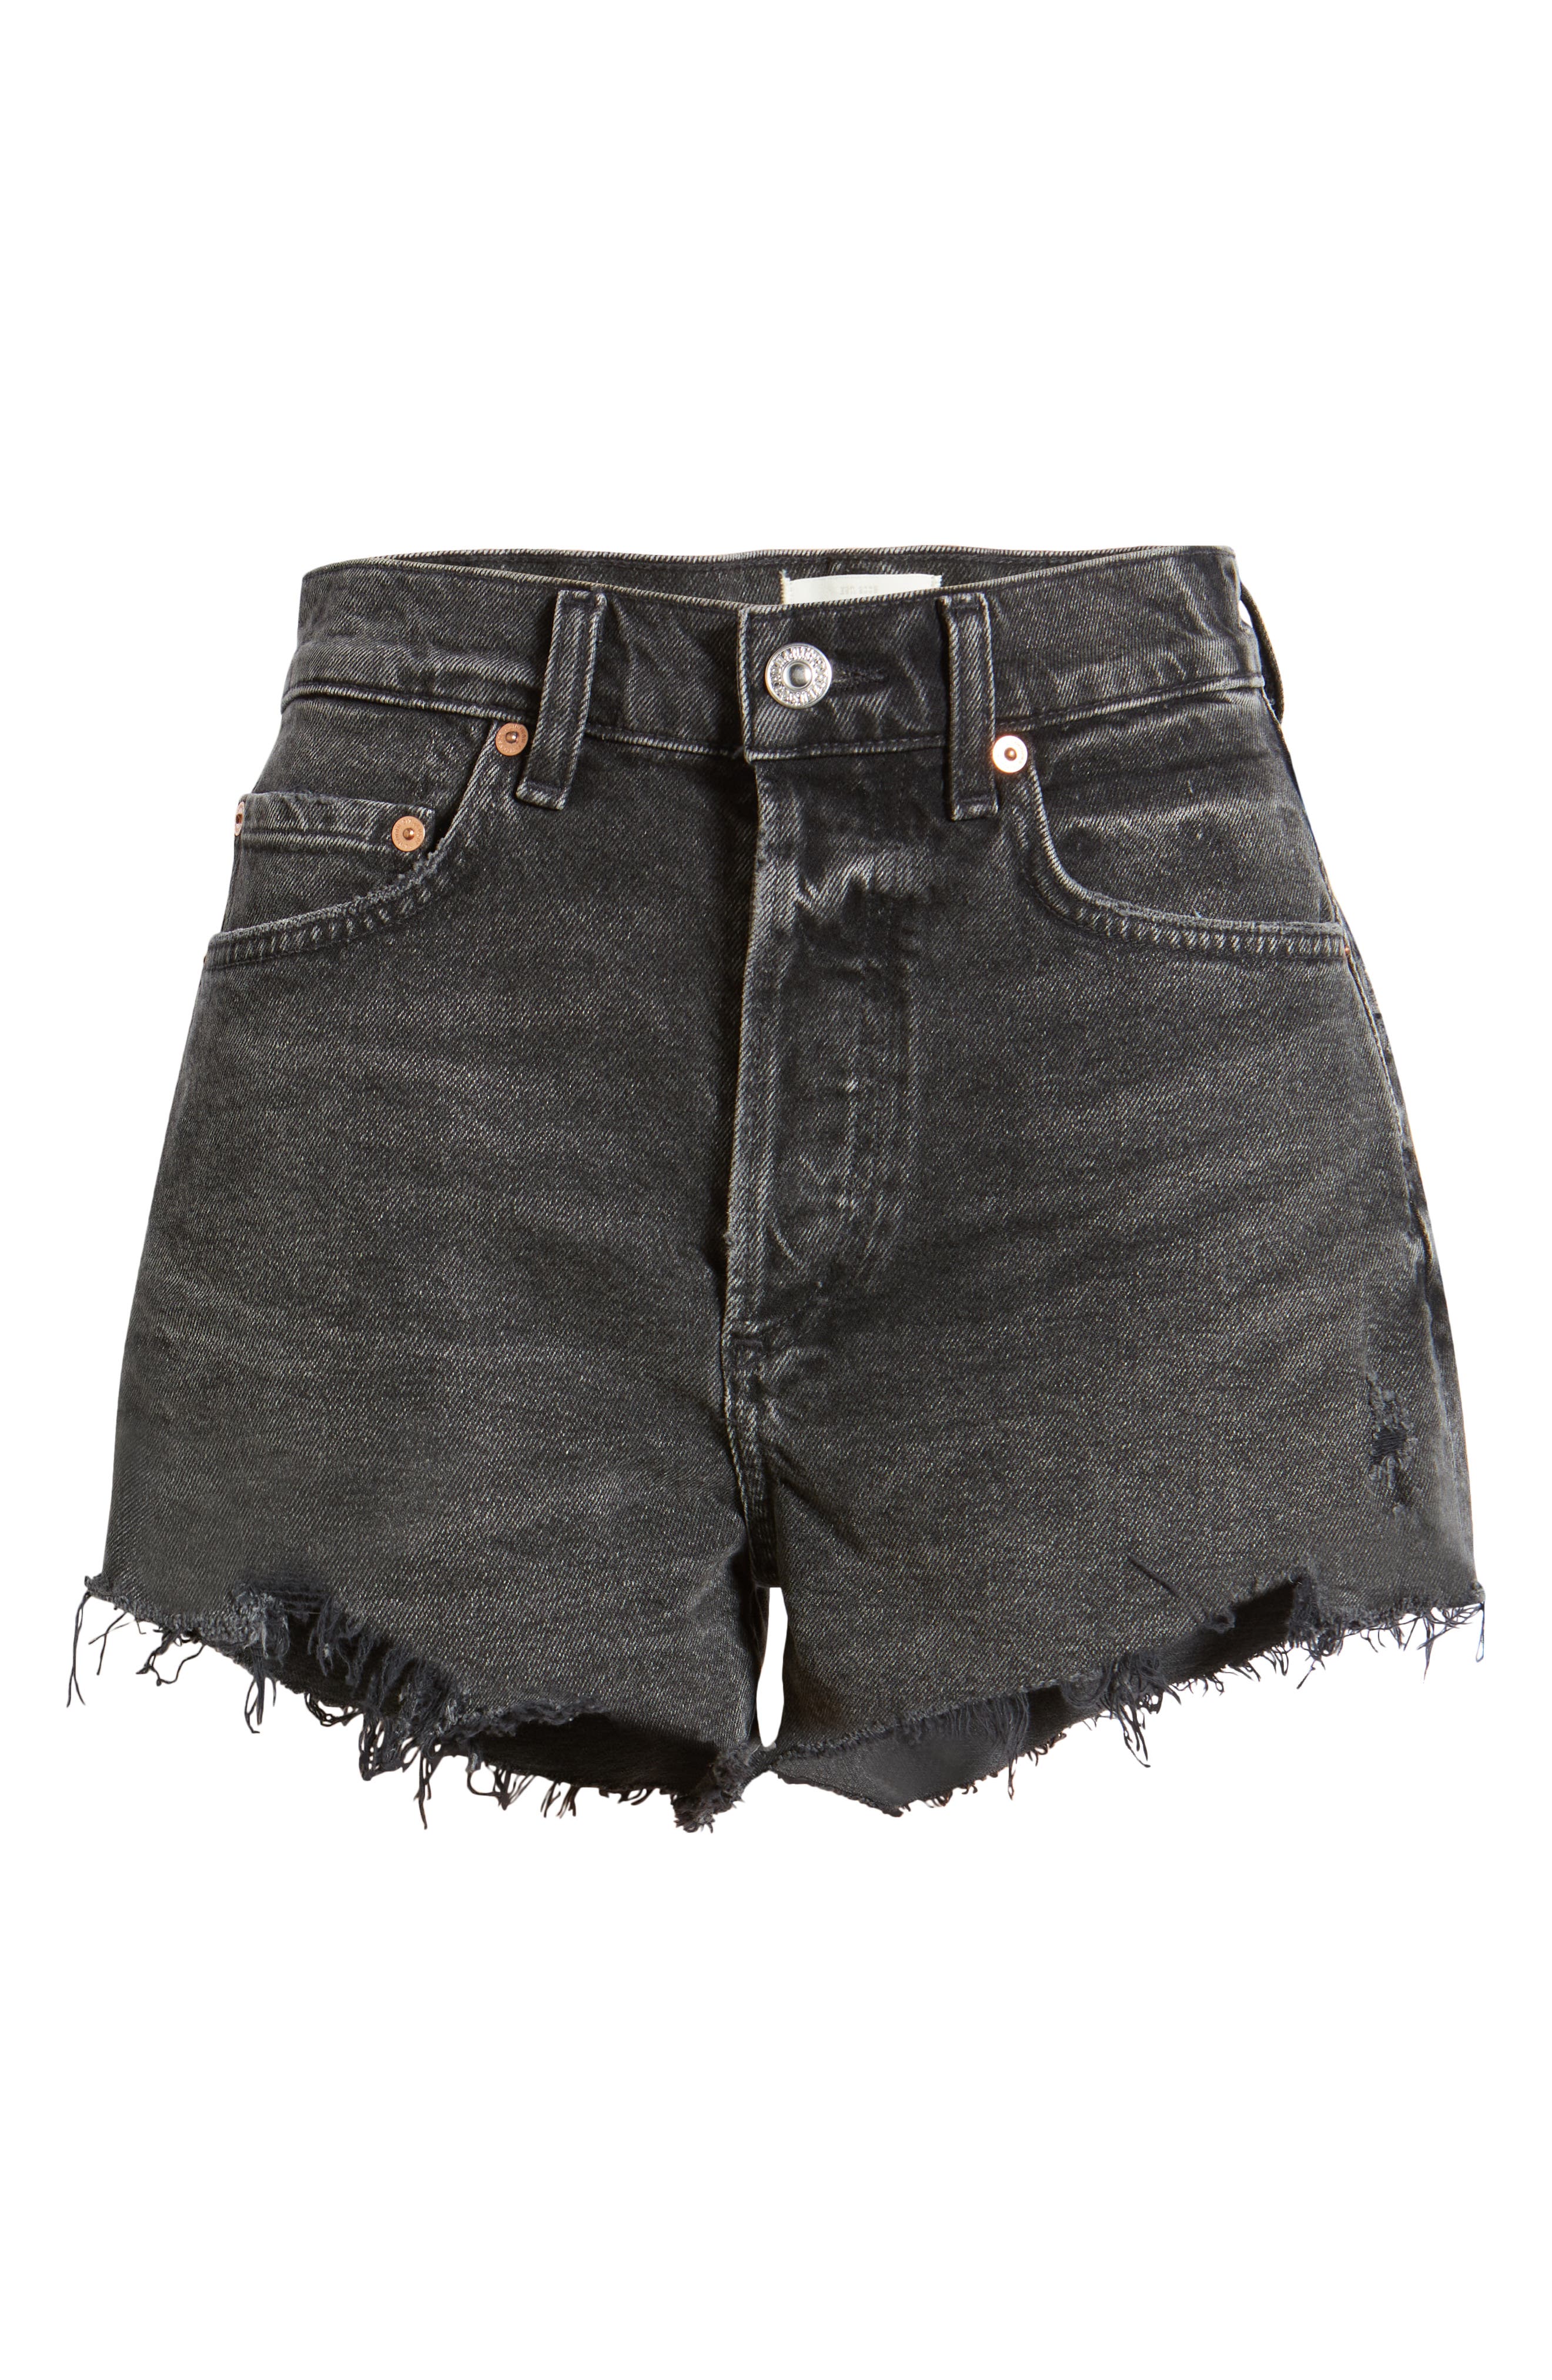 Citizens of Humanity Annabelle High Waist Cutoff Denim Shorts in Oracle